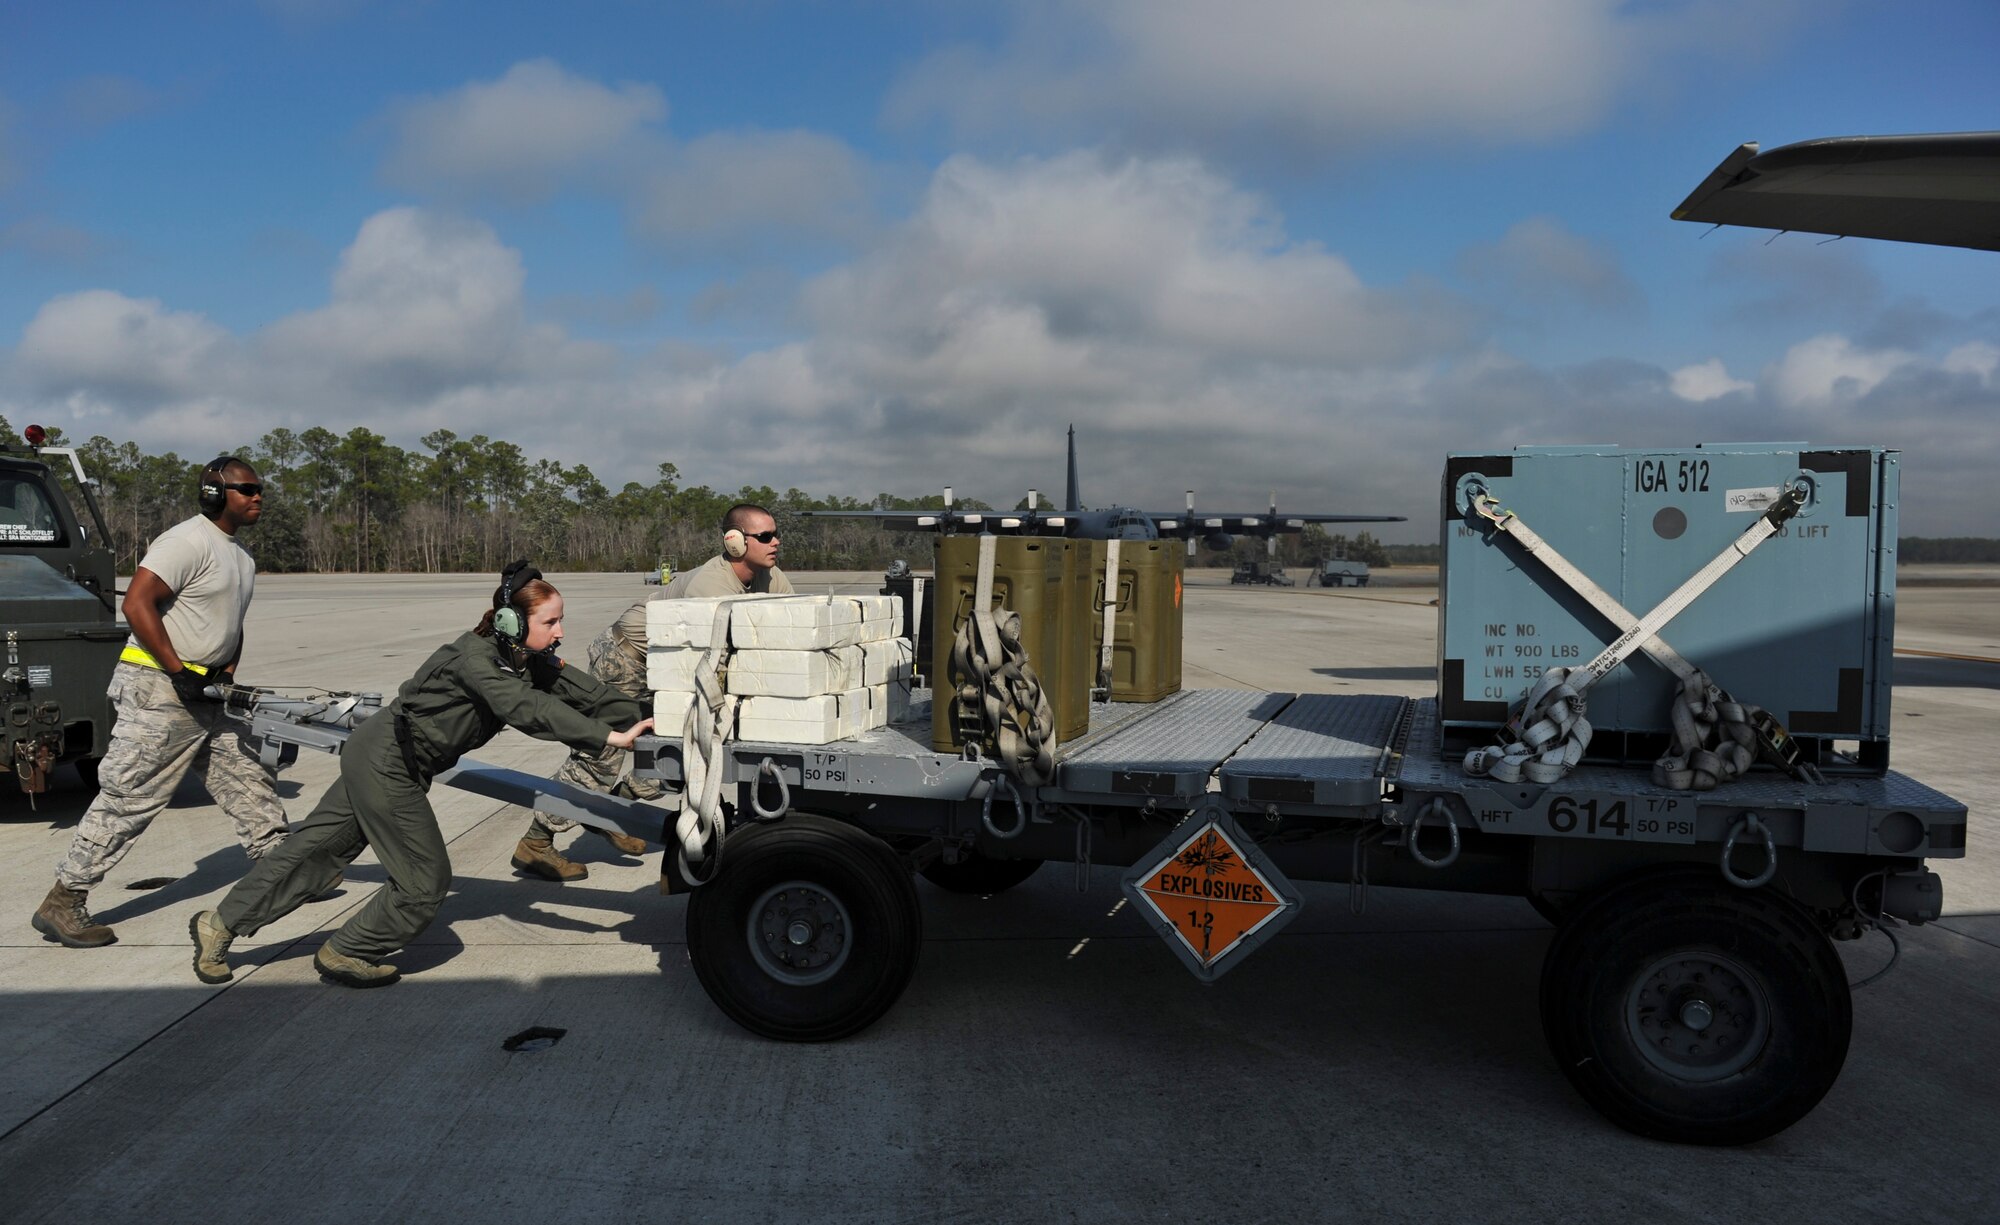 Senior Airmen Patrick Beam and Marcus Montgomery, 1st Special Operations Equipment Maintenance Squadron munitions line delivery drivers, push a munitions trailer with an aircrew member on Hurlburt Field, Fla., Dec. 6, 2013. Line delivery drivers handed 105mm rounds to aircrew members individually through a side door on the aircraft. (U.S. Air Force photo/Staff Sgt. John Bainter)